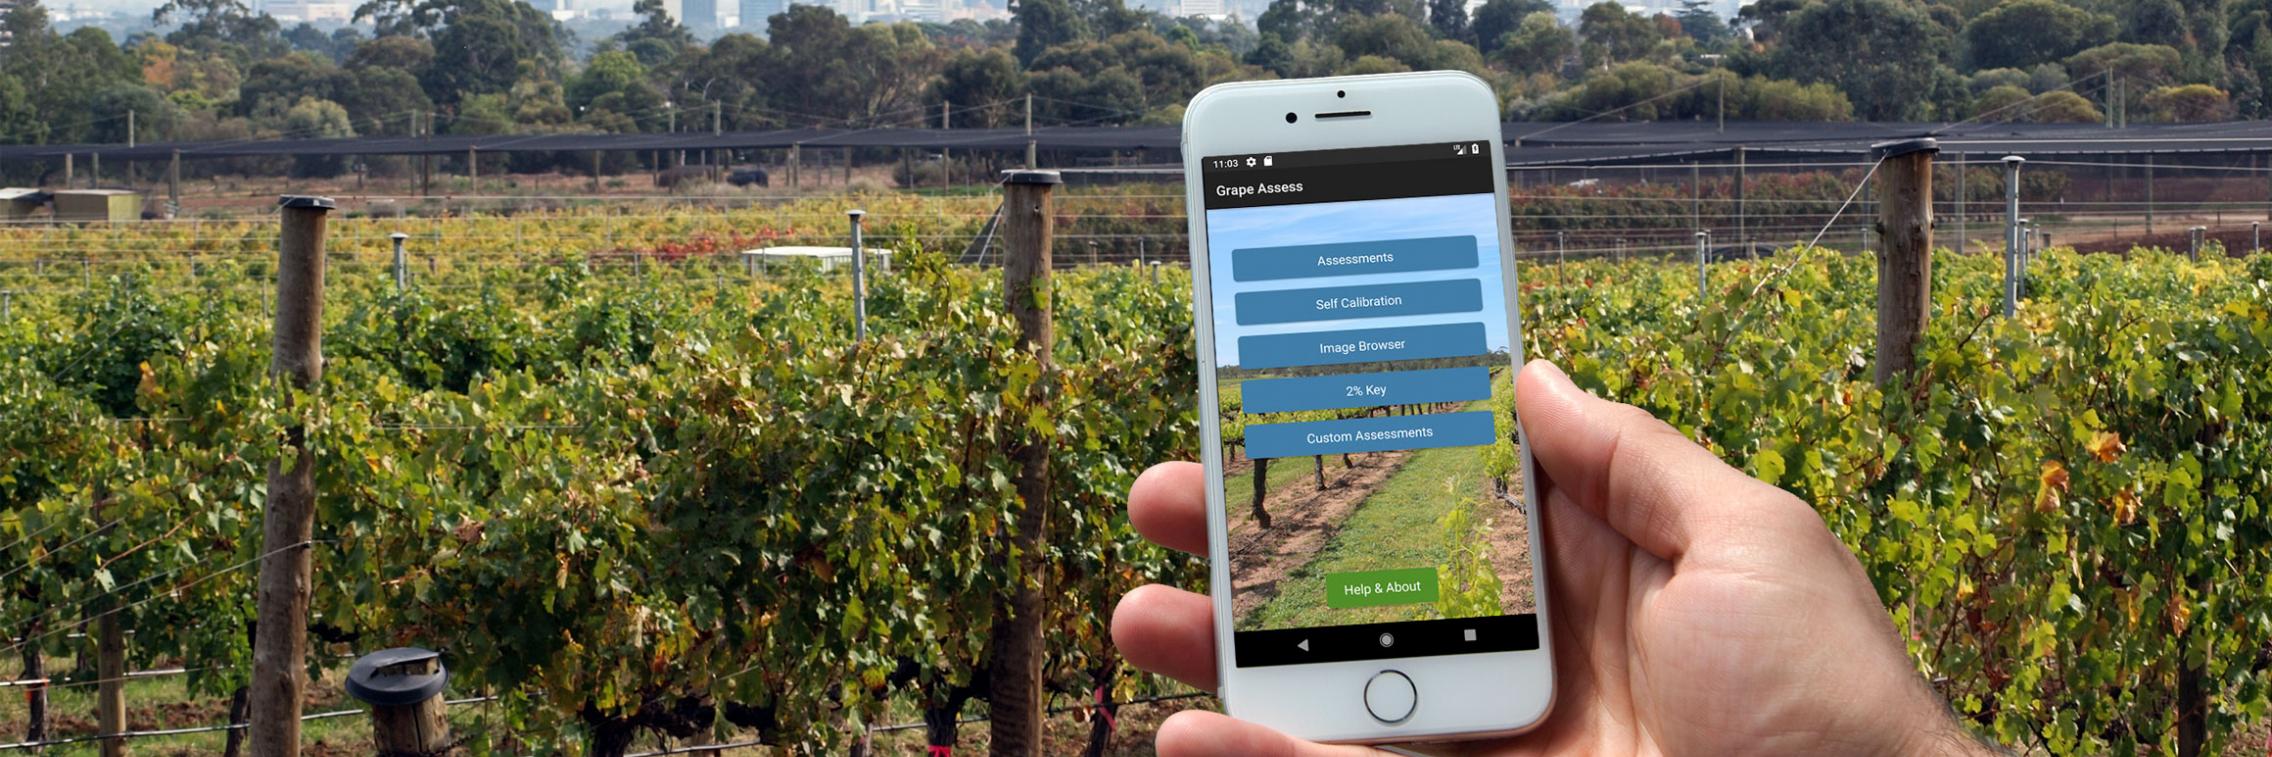 The improved powdery mildew assessment application, PMapp, and a new application, Grape Assess, are now available on Android and Apple devices.